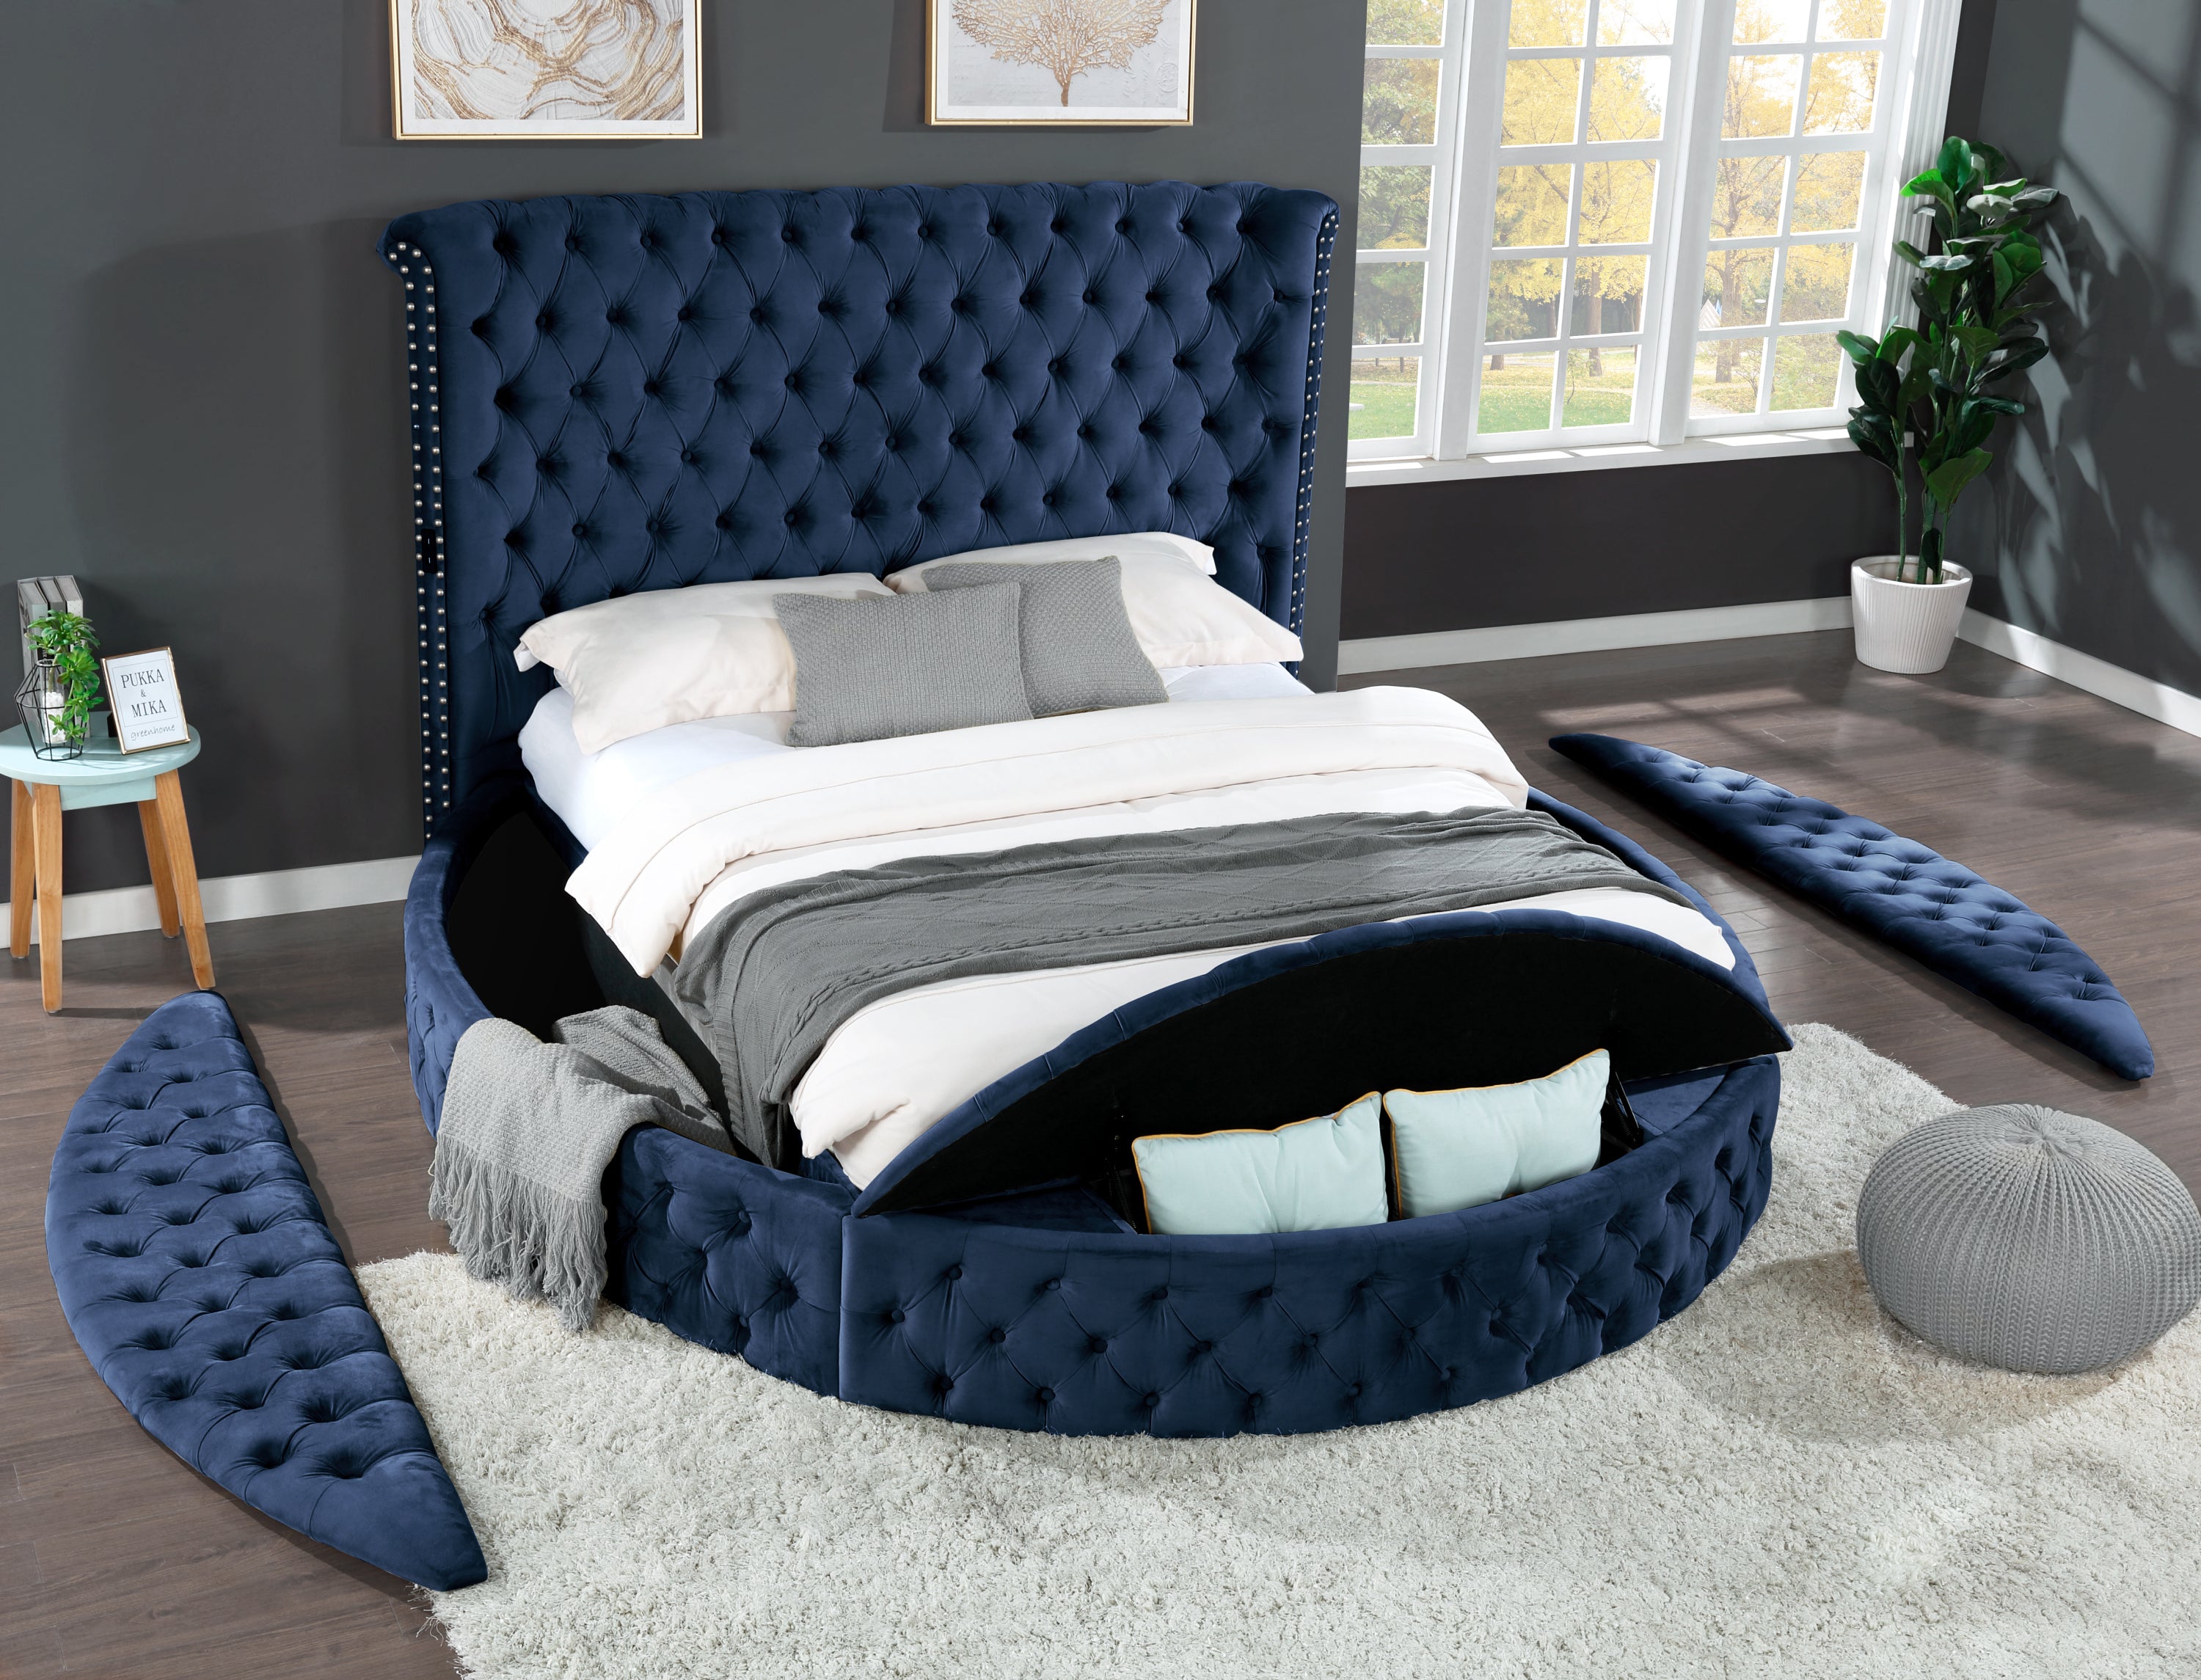 King Size Tufted Storage Bed made with Wood - Navy